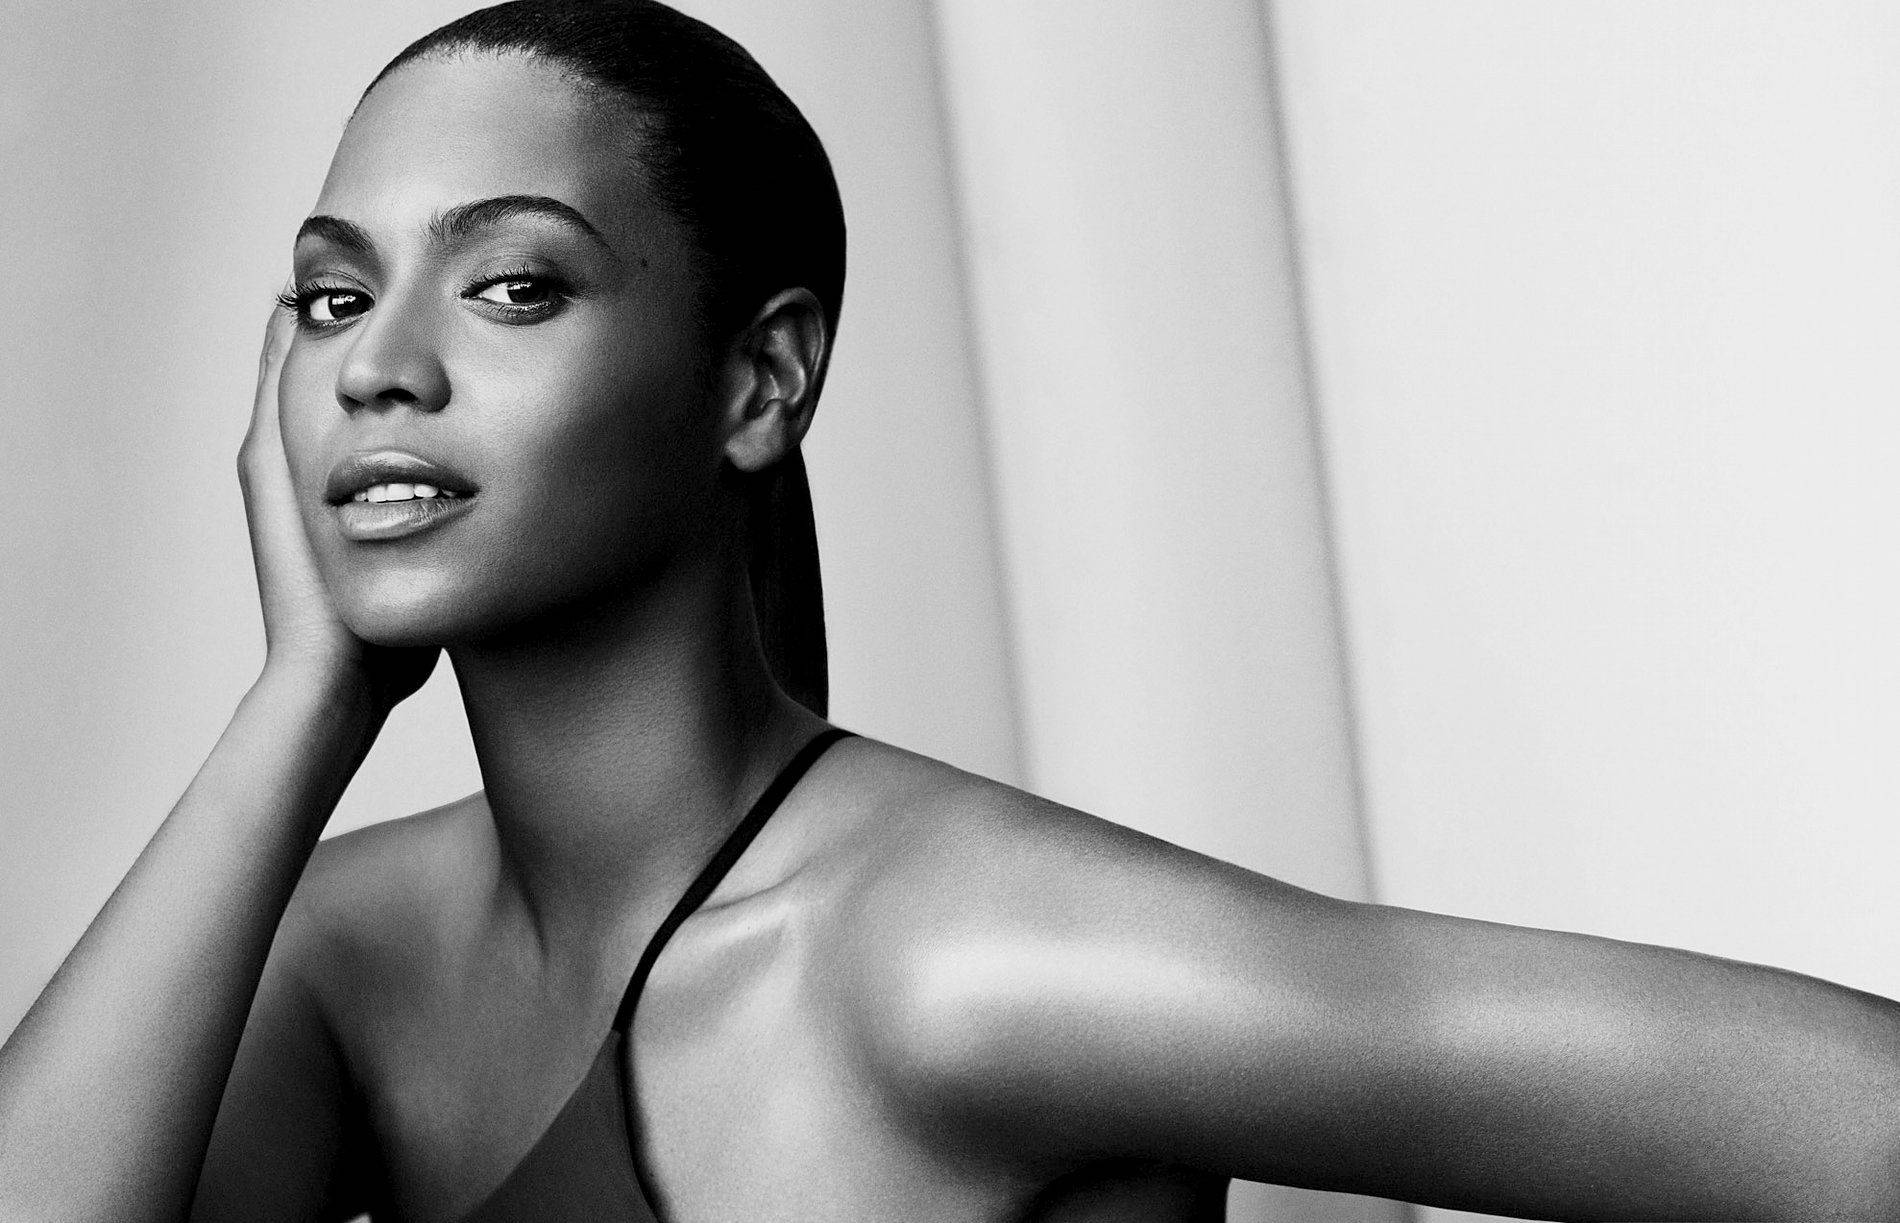 Queen Beyonce Slaying In A Black And White Photo-shoot Background